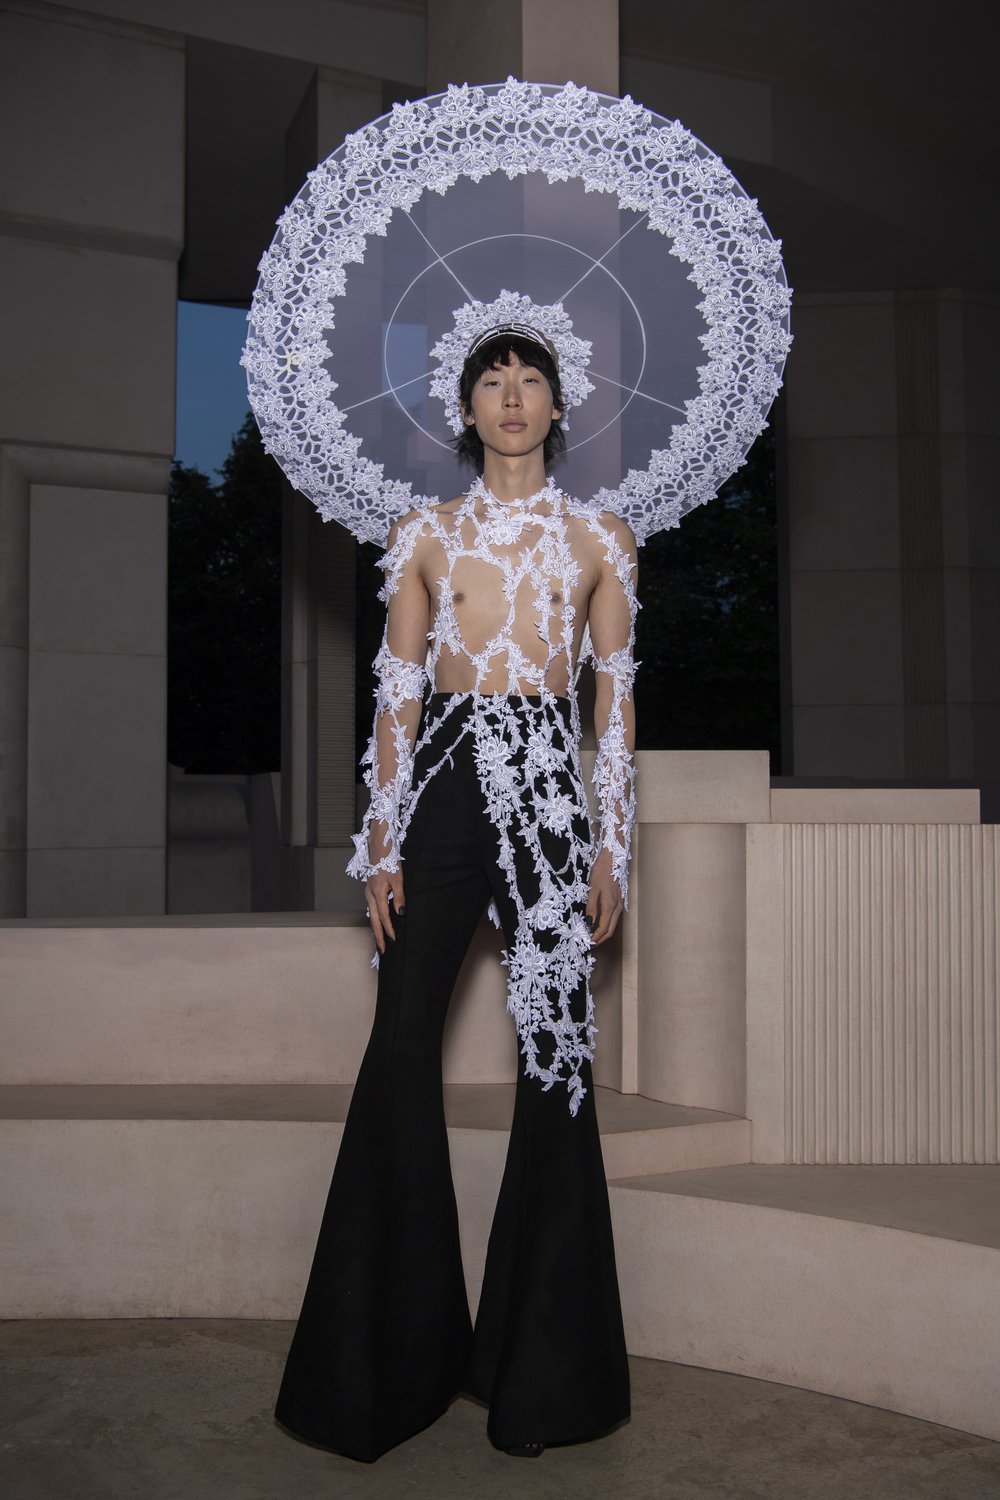 A model wears black flares and has floral detail from an Oxfam pre-loved bridal gown draped over their chest with a white halo also with the floral detail on it